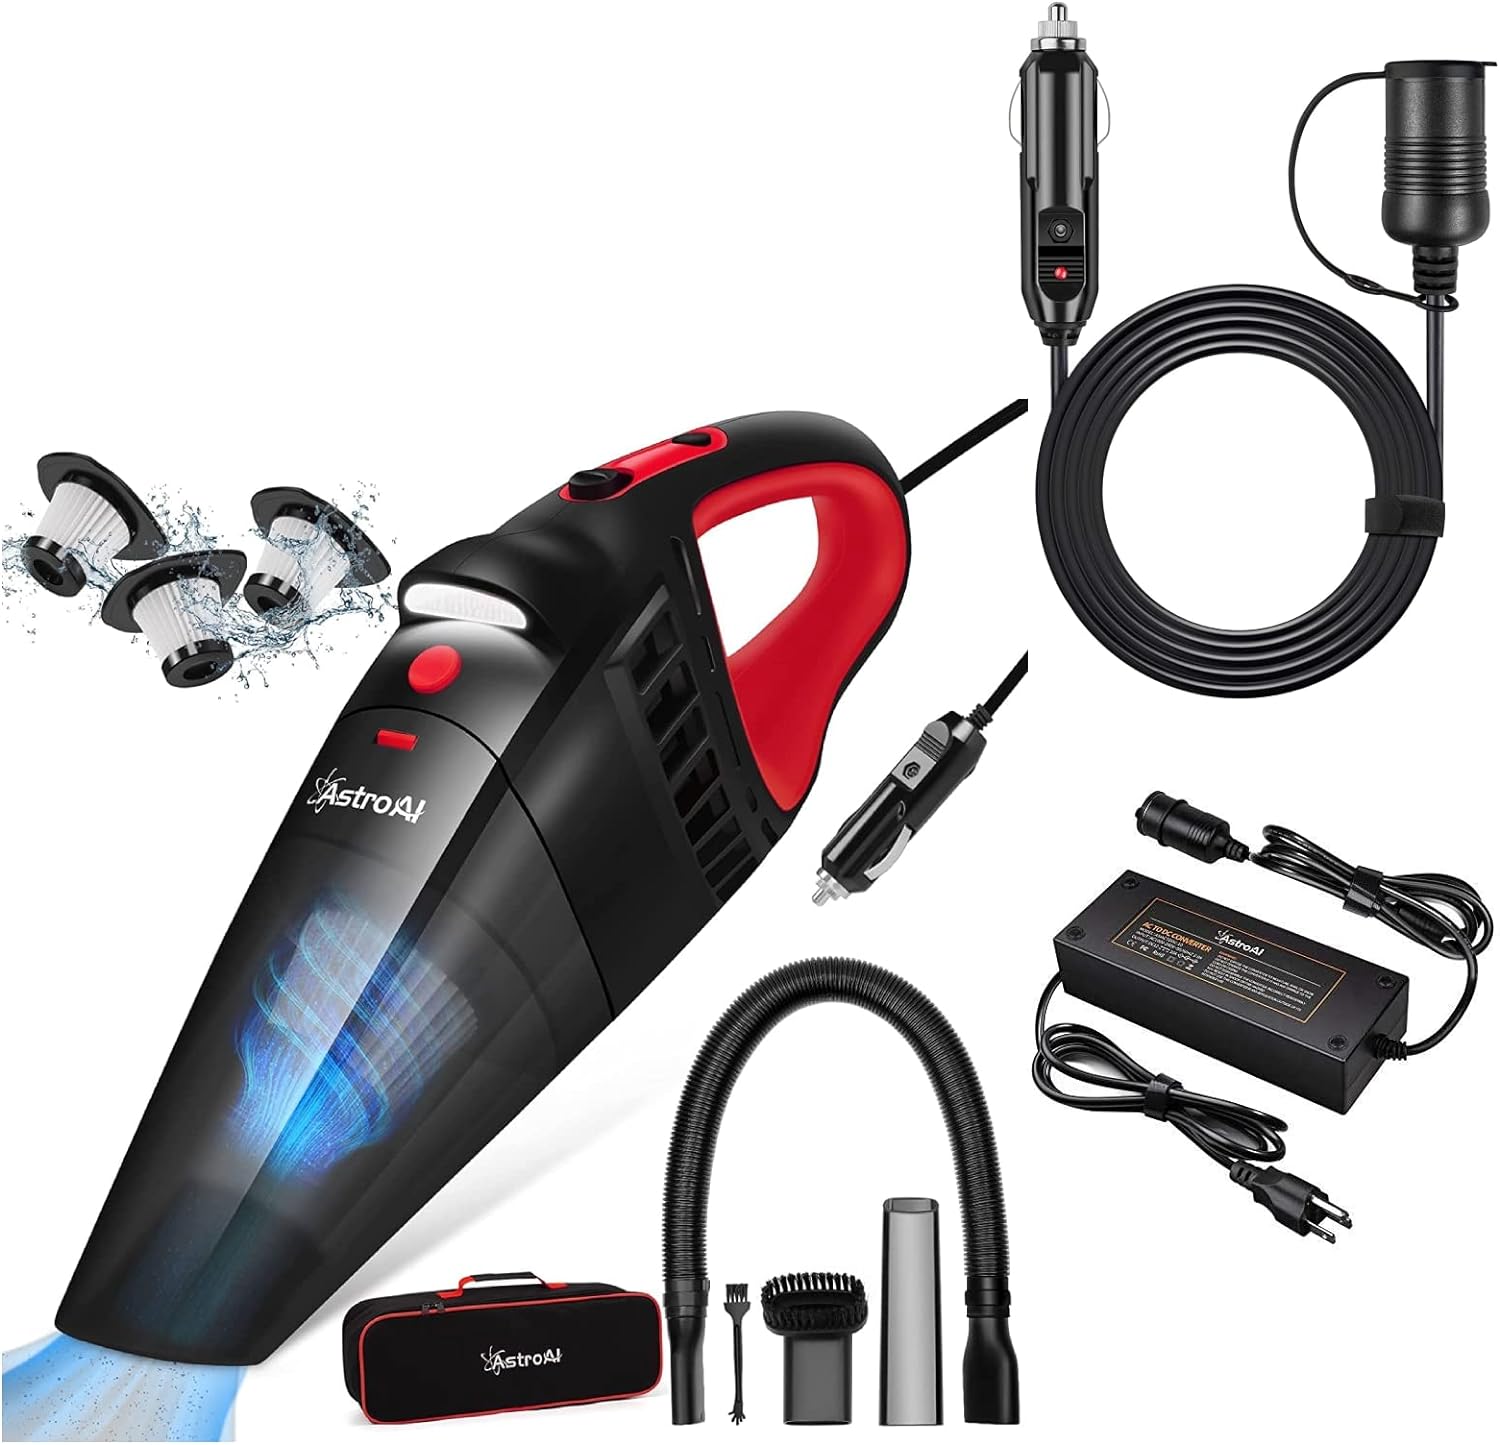 a picture showing how to make millions with car accessories -- sell vacuum cleaners